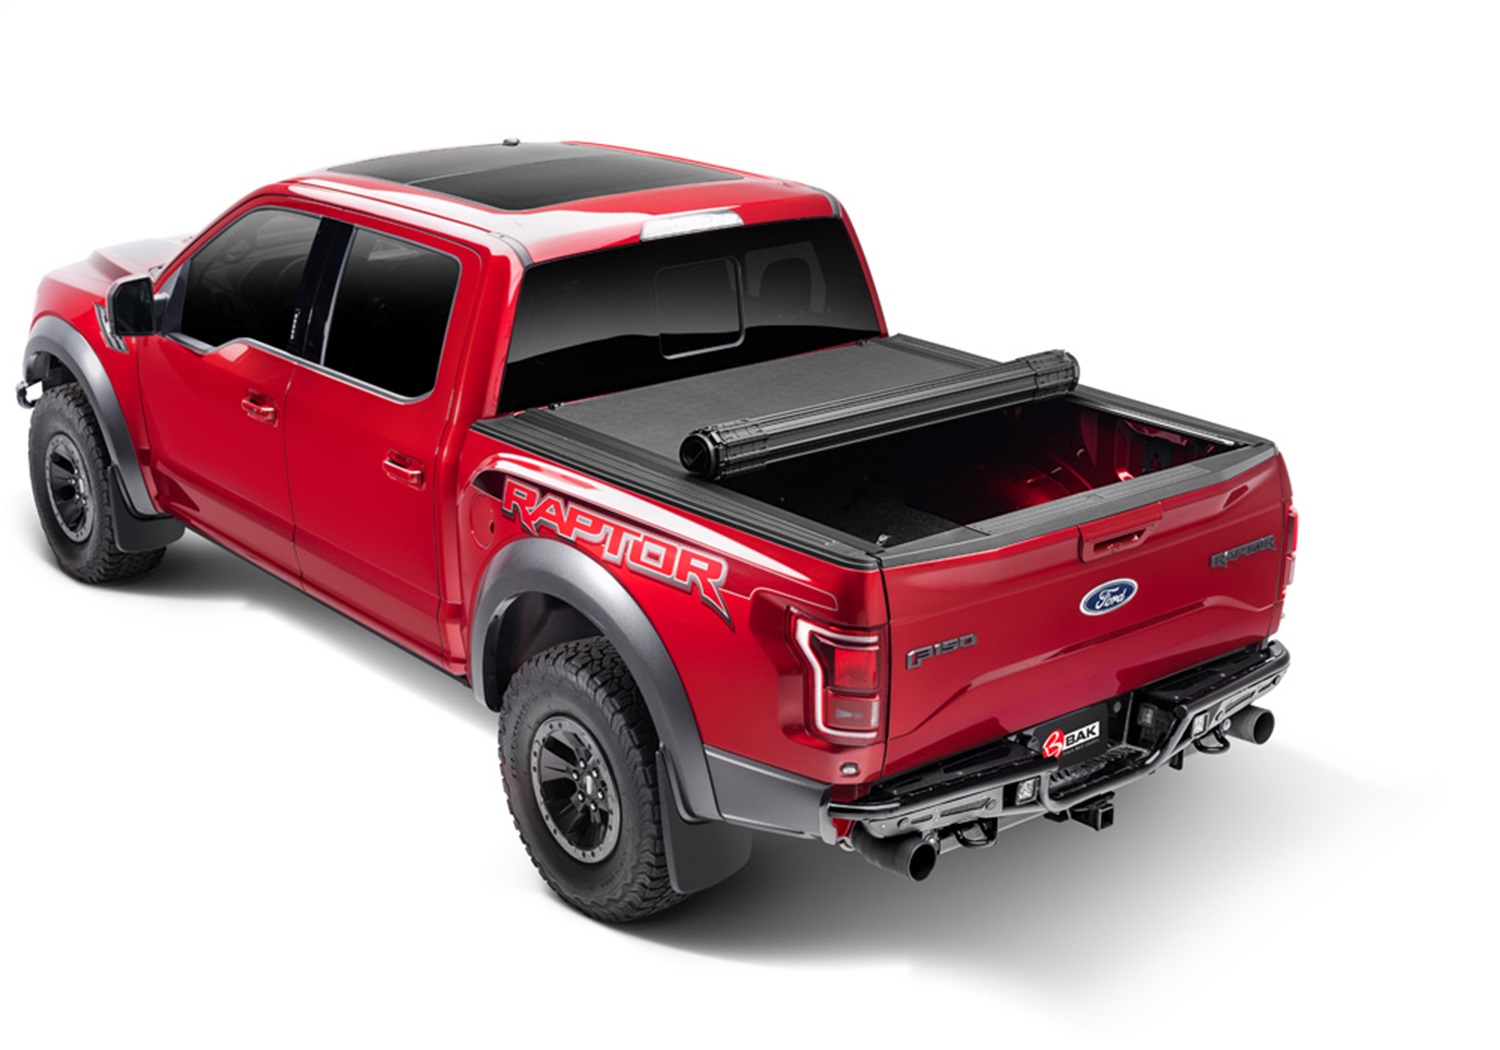 BAK Industries 80309 Revolver X4s Hard Rolling Truck Bed Cover Fits 04-14 F-150